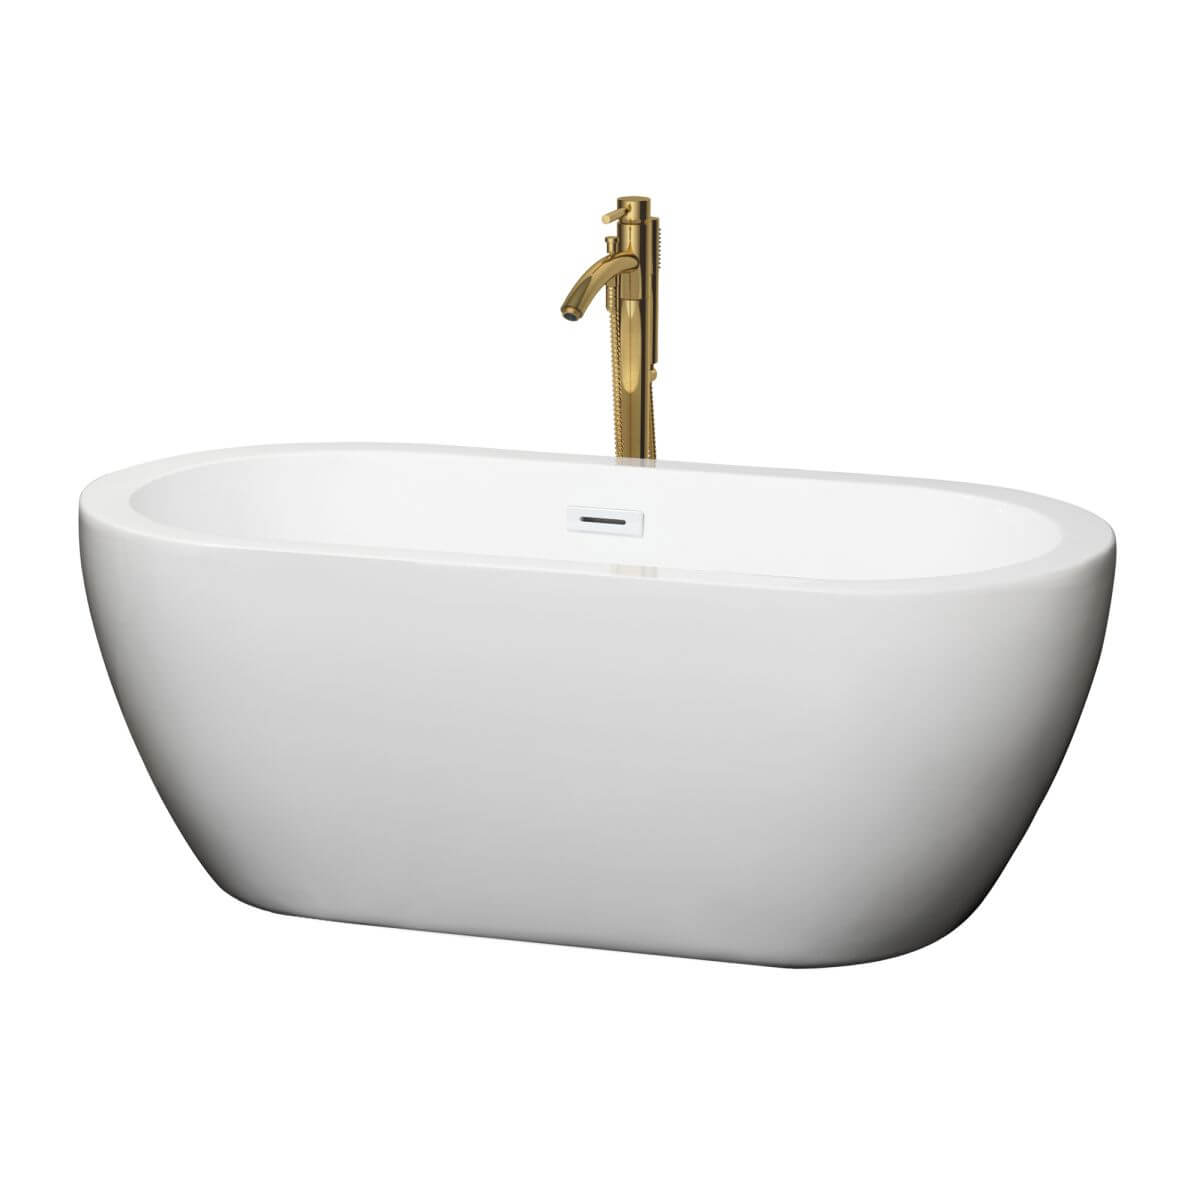 Wyndham Collection Soho 60 inch Freestanding Bathtub in White with Shiny White Trim and Floor Mounted Faucet in Brushed Gold - WCOBT100260SWATPGD